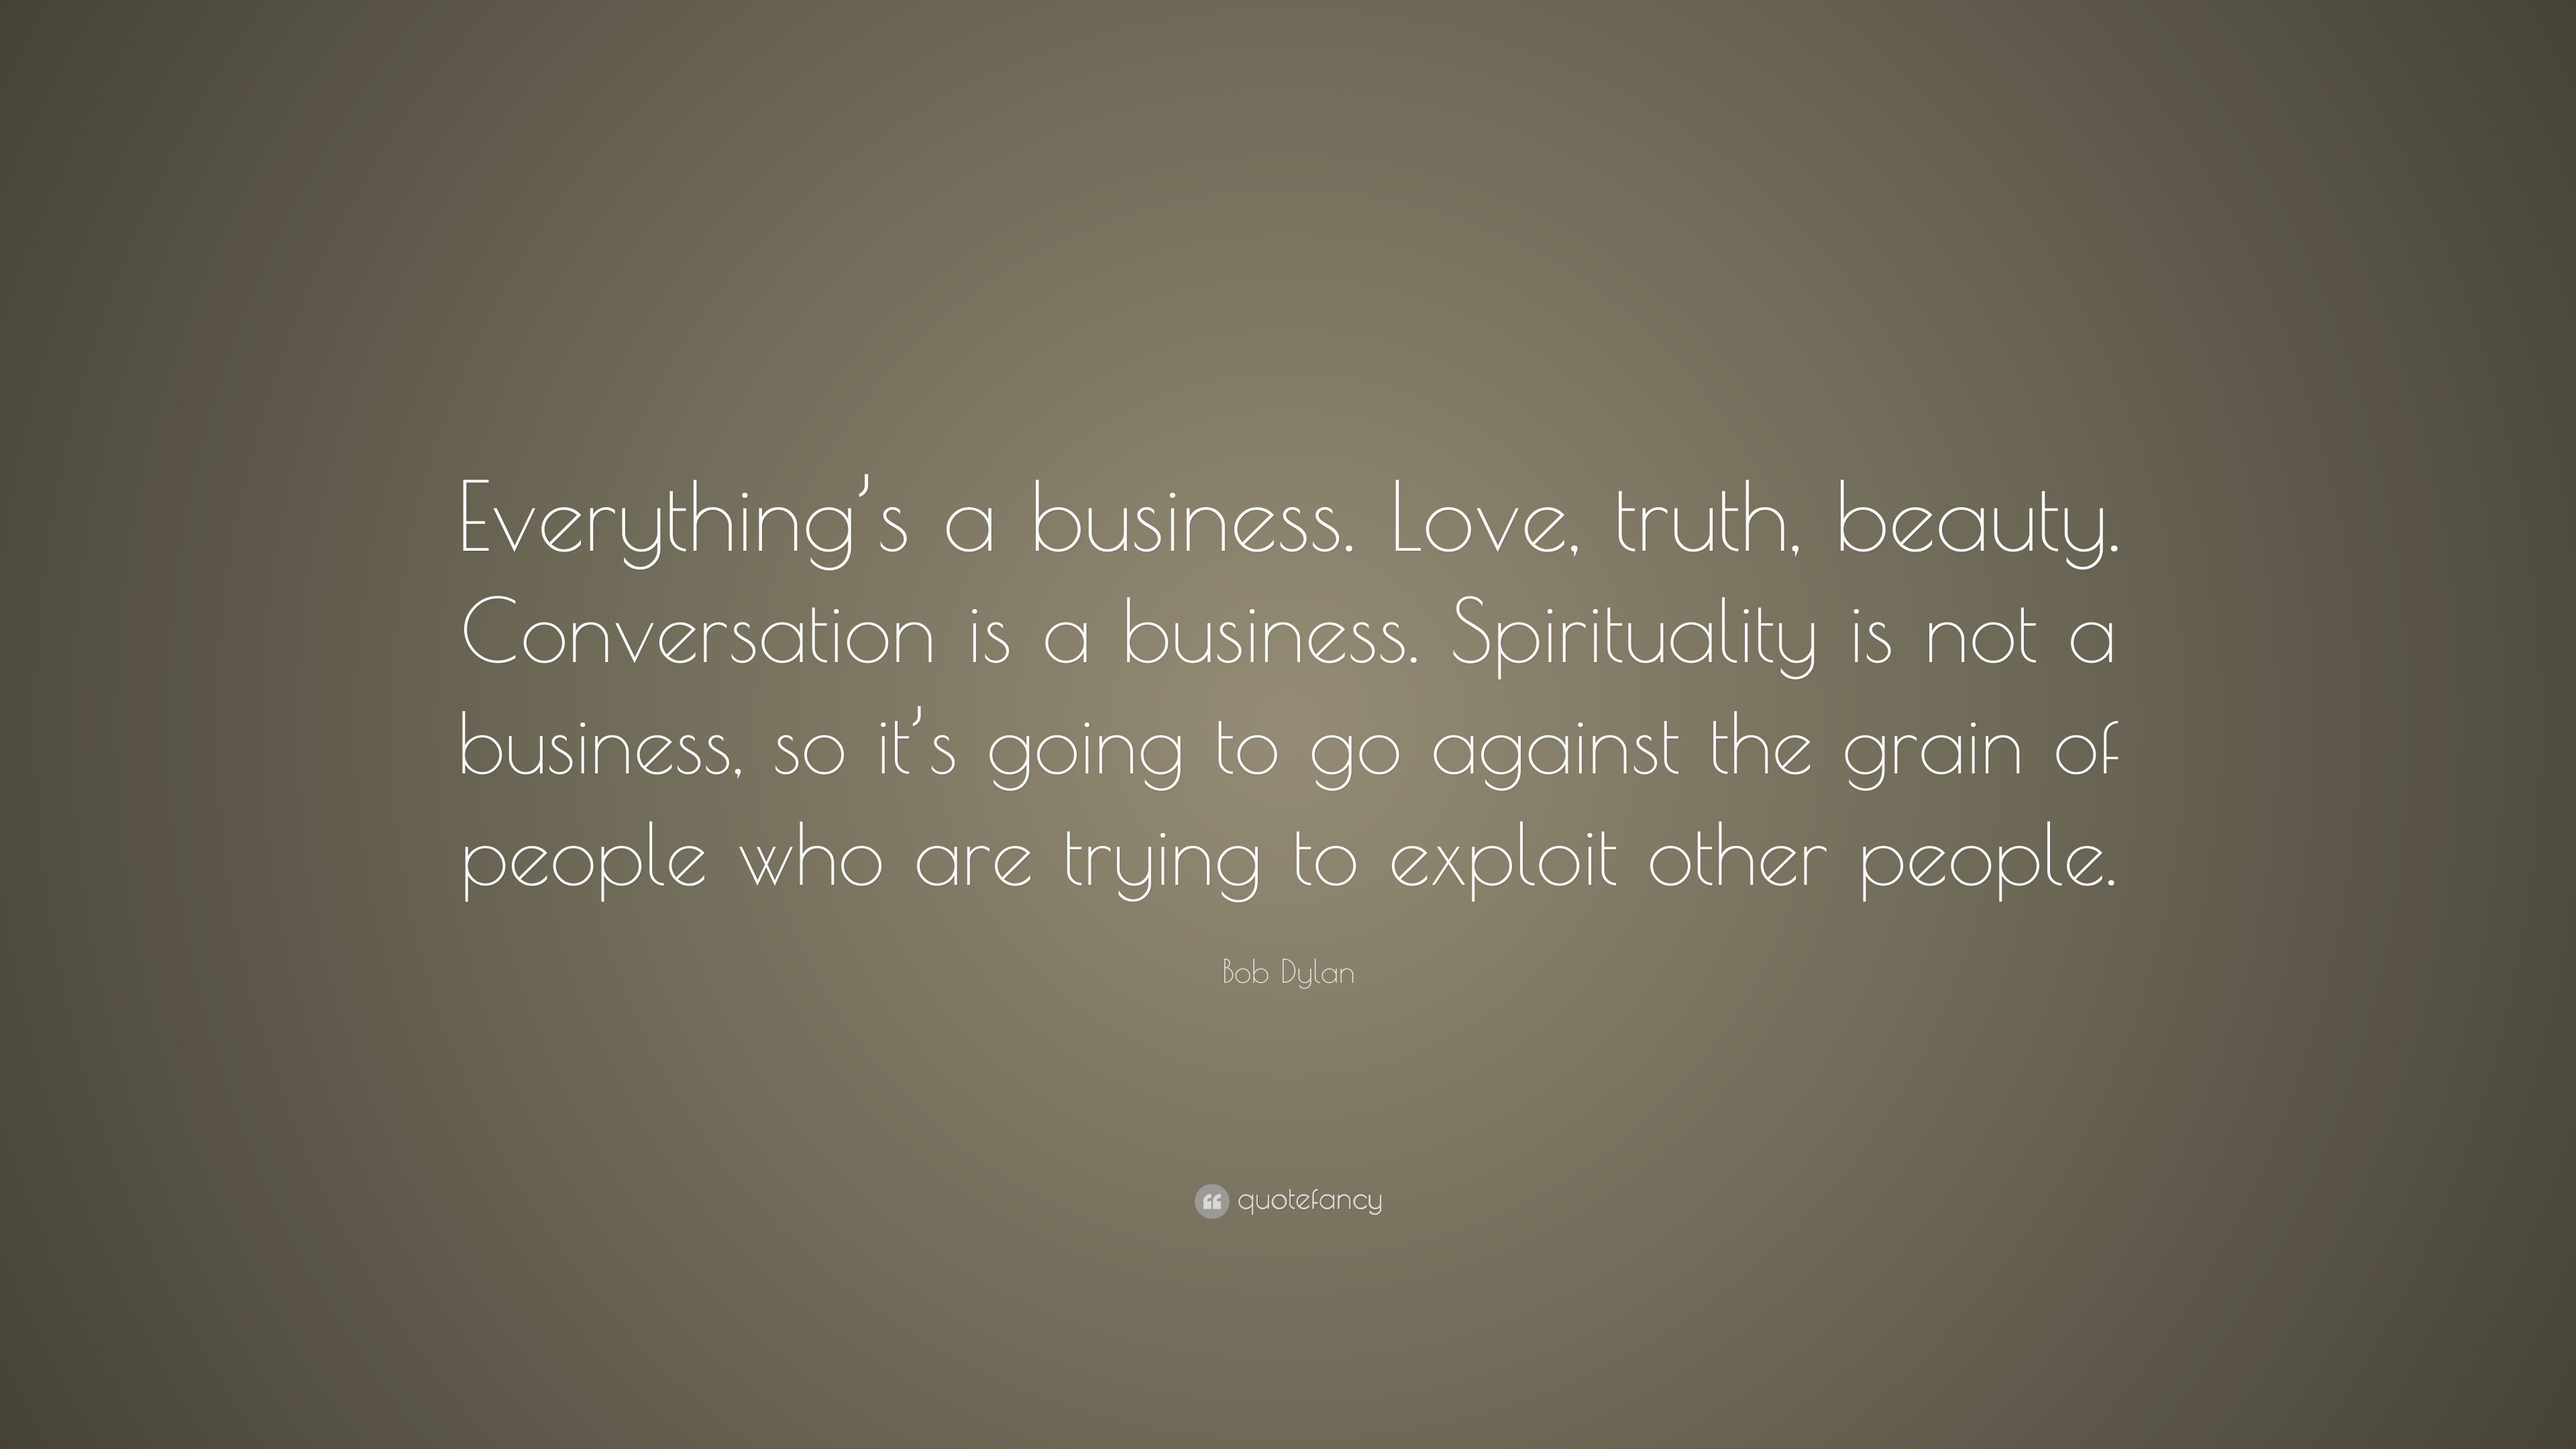 Bob Dylan Quote “Everything s a business Love truth beauty Conversation